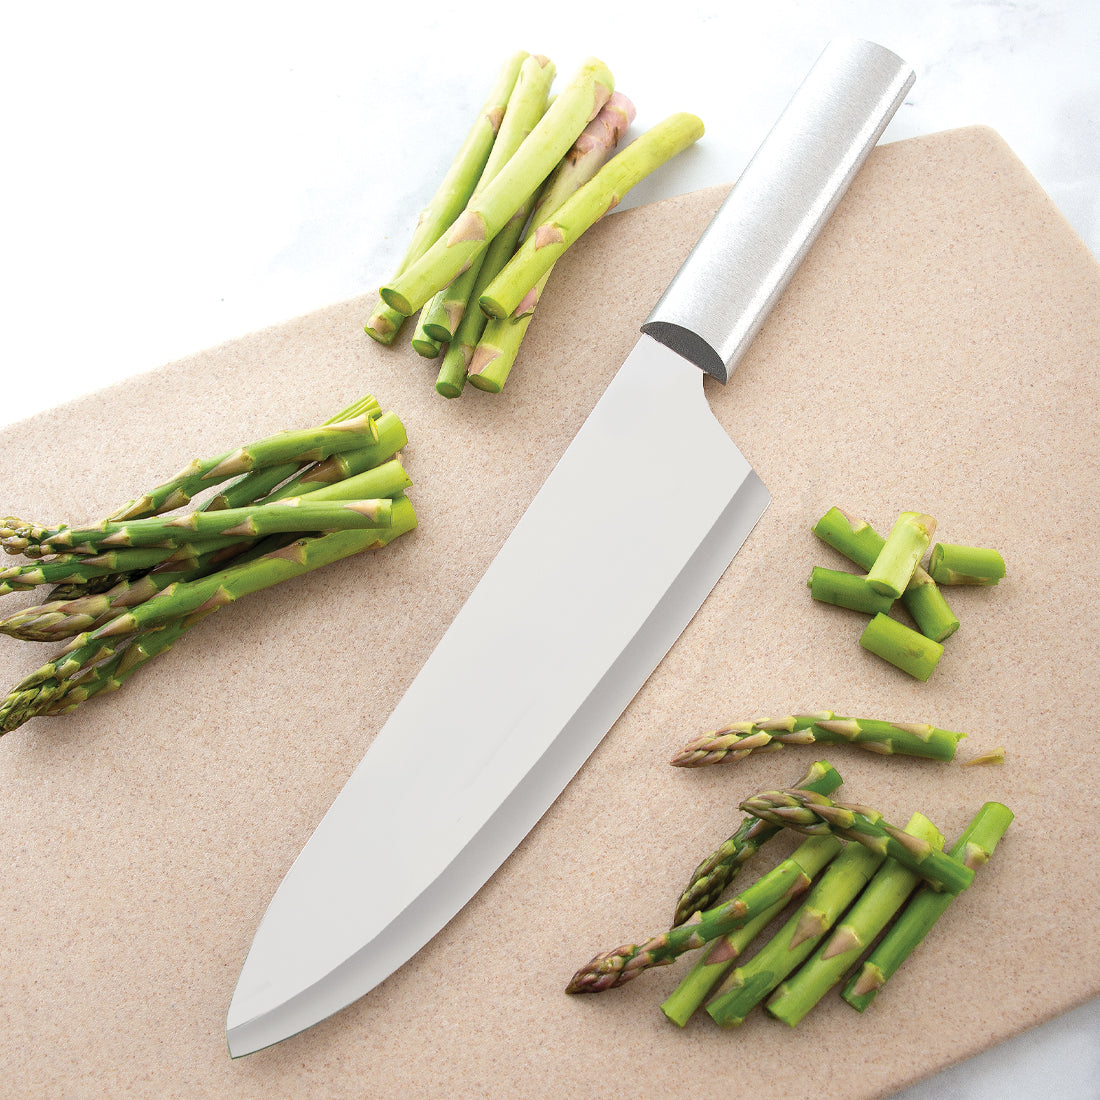 French Chef Knife with silver handle on cutting board with asparagus